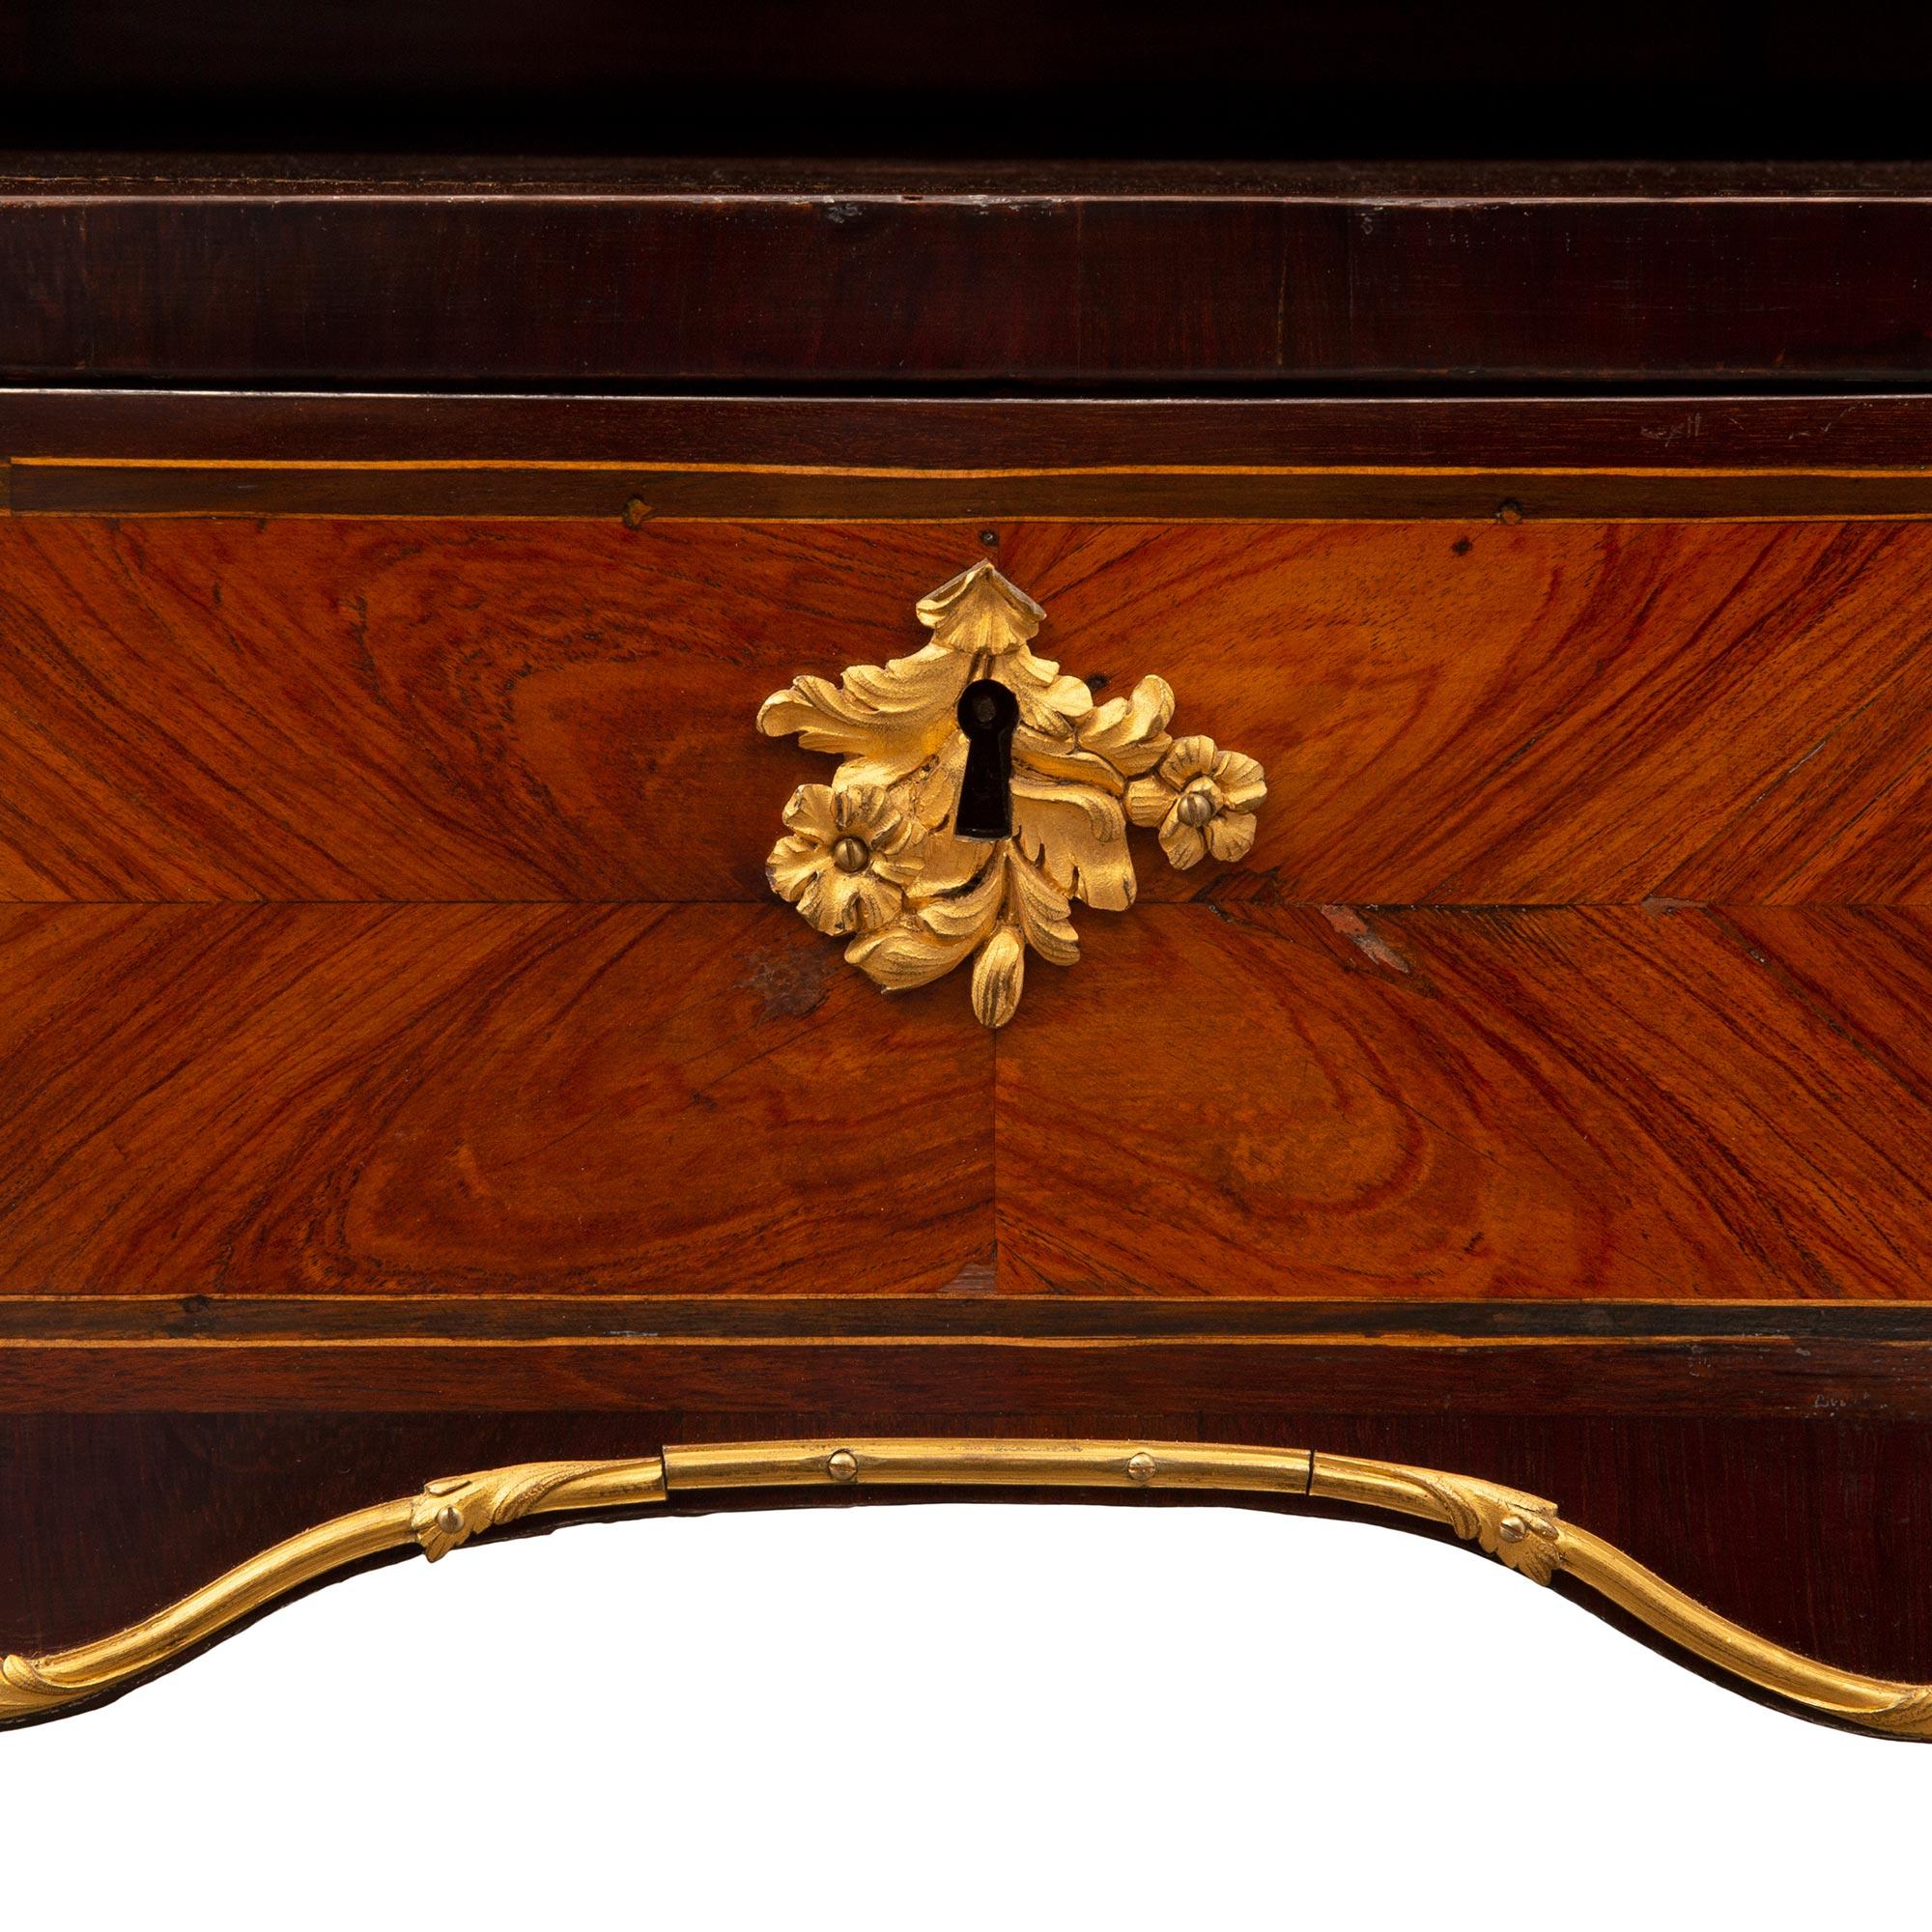 French 18th Century Louis XV Period Kingwood, Tulipwood and Ormolu Desk For Sale 6